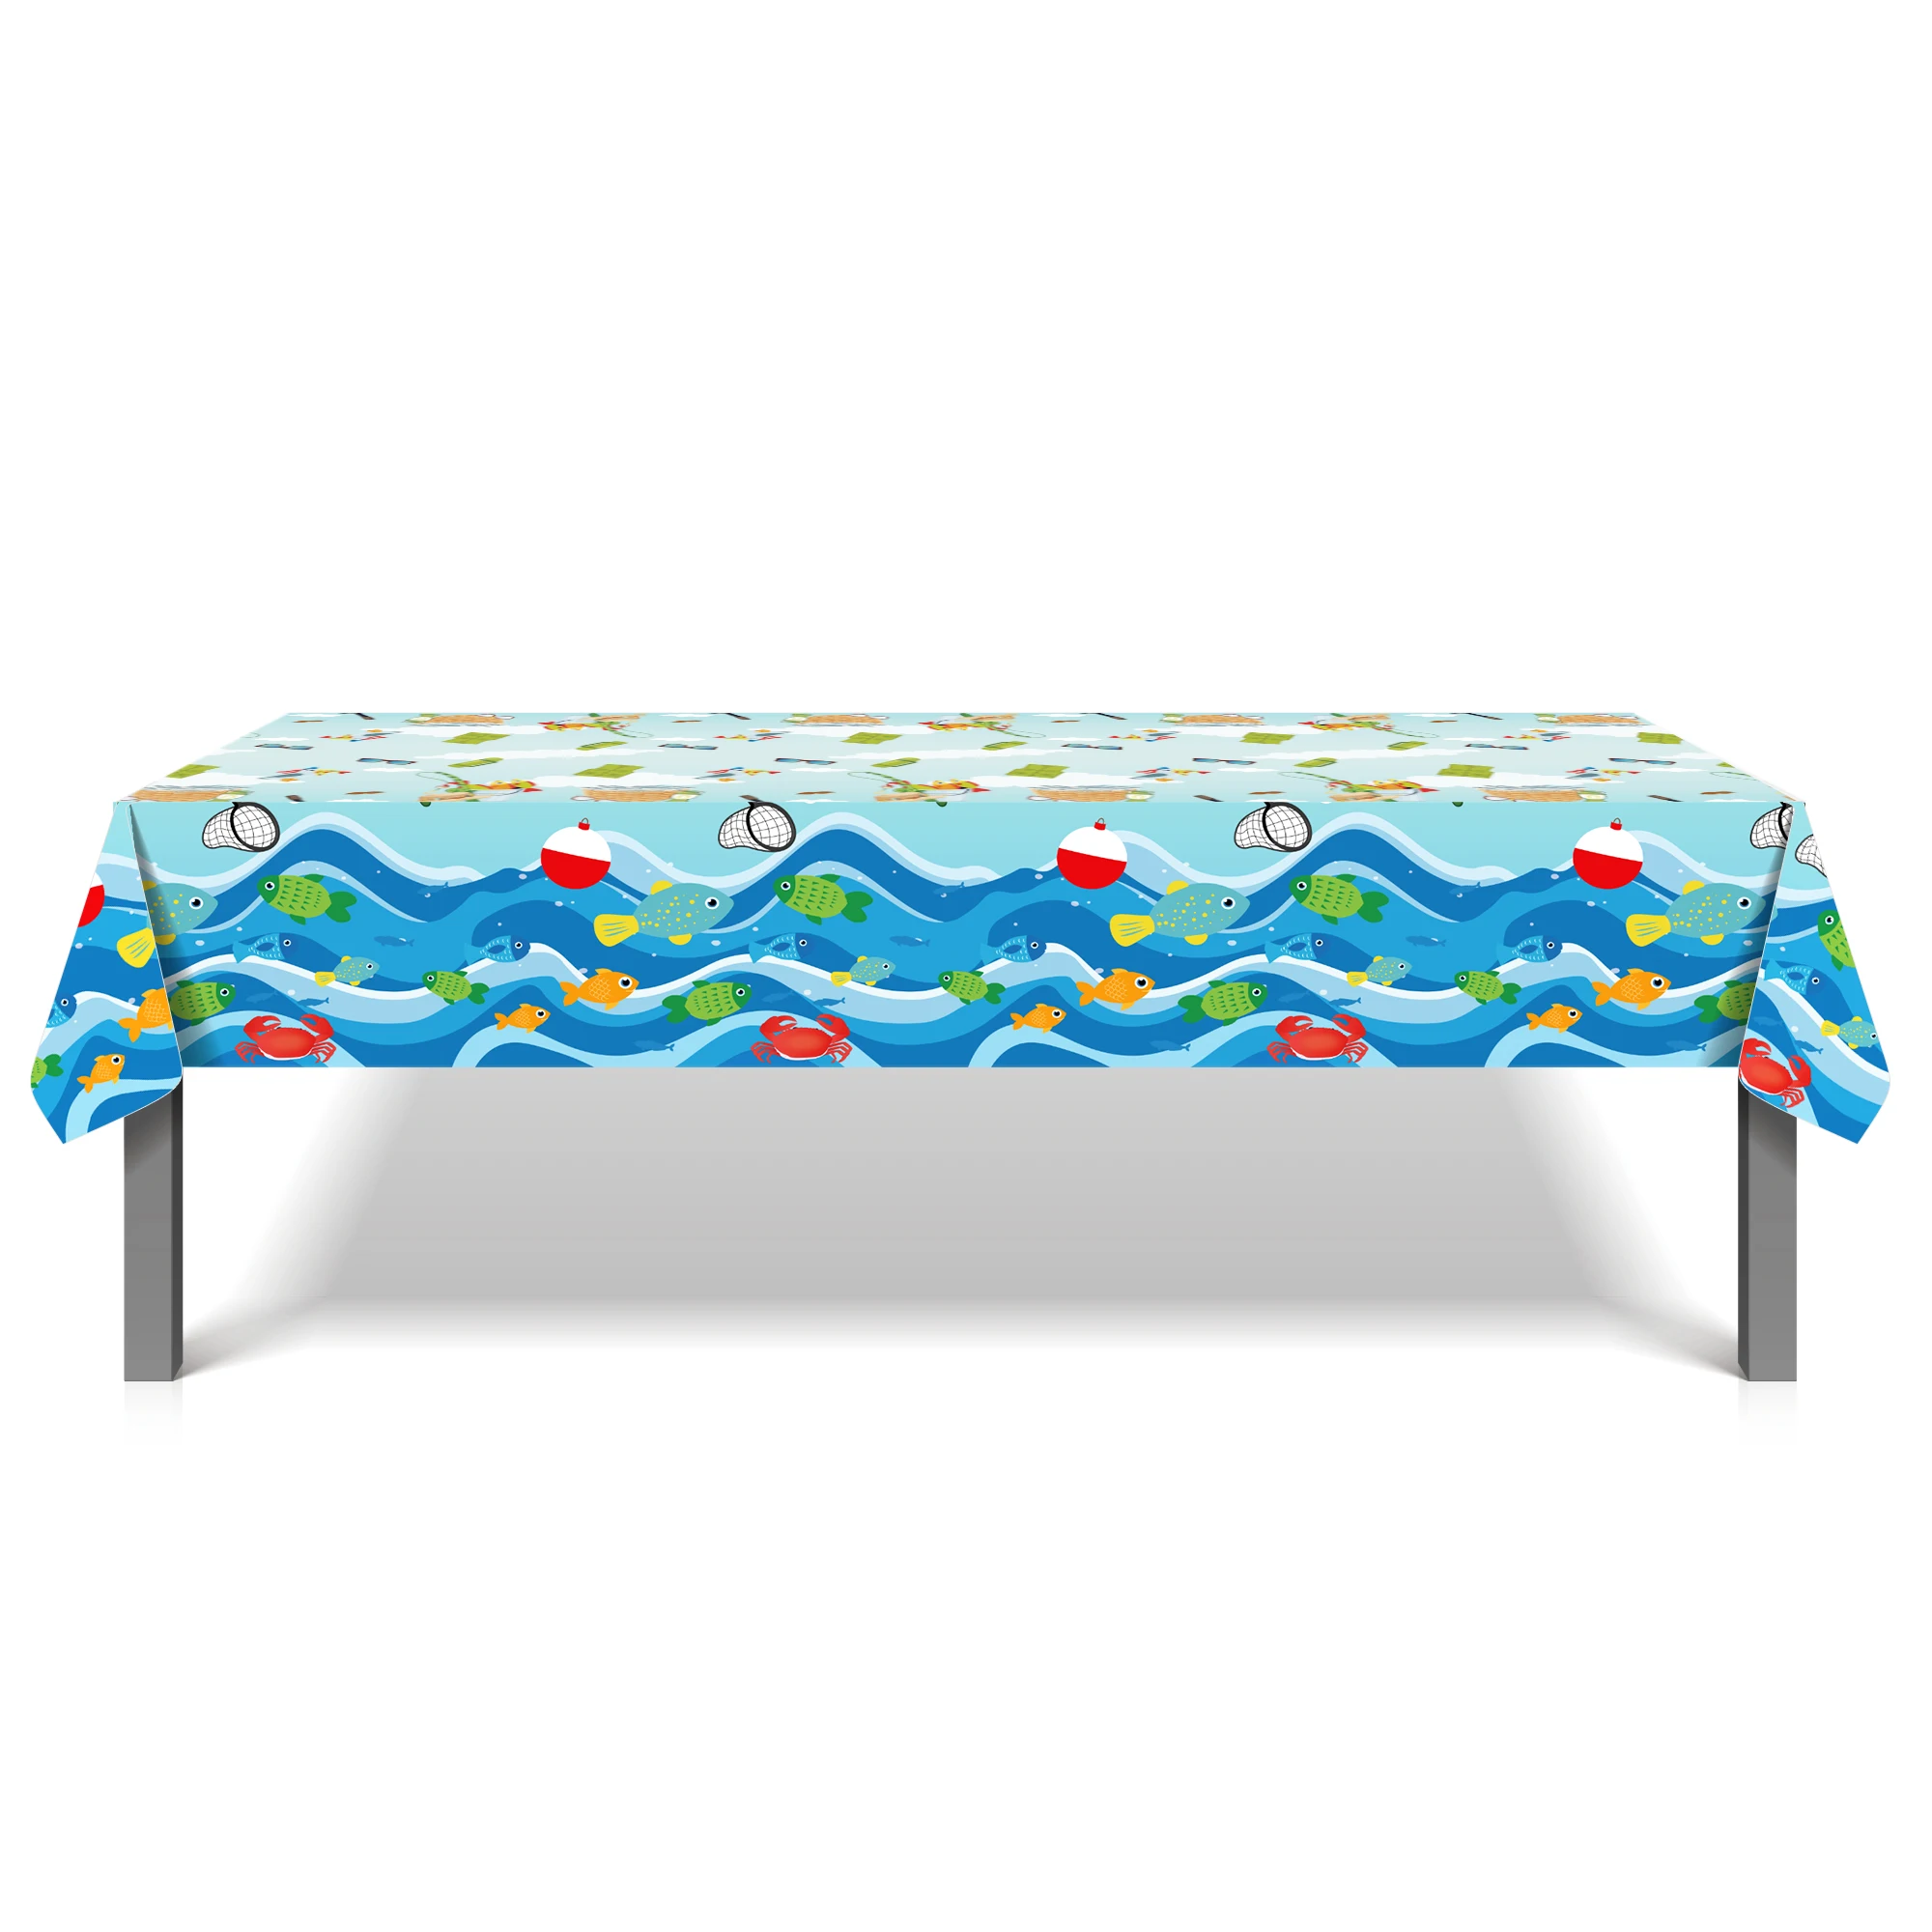 Disposable Tablecloth Baby Shower Birthday Party Supplies